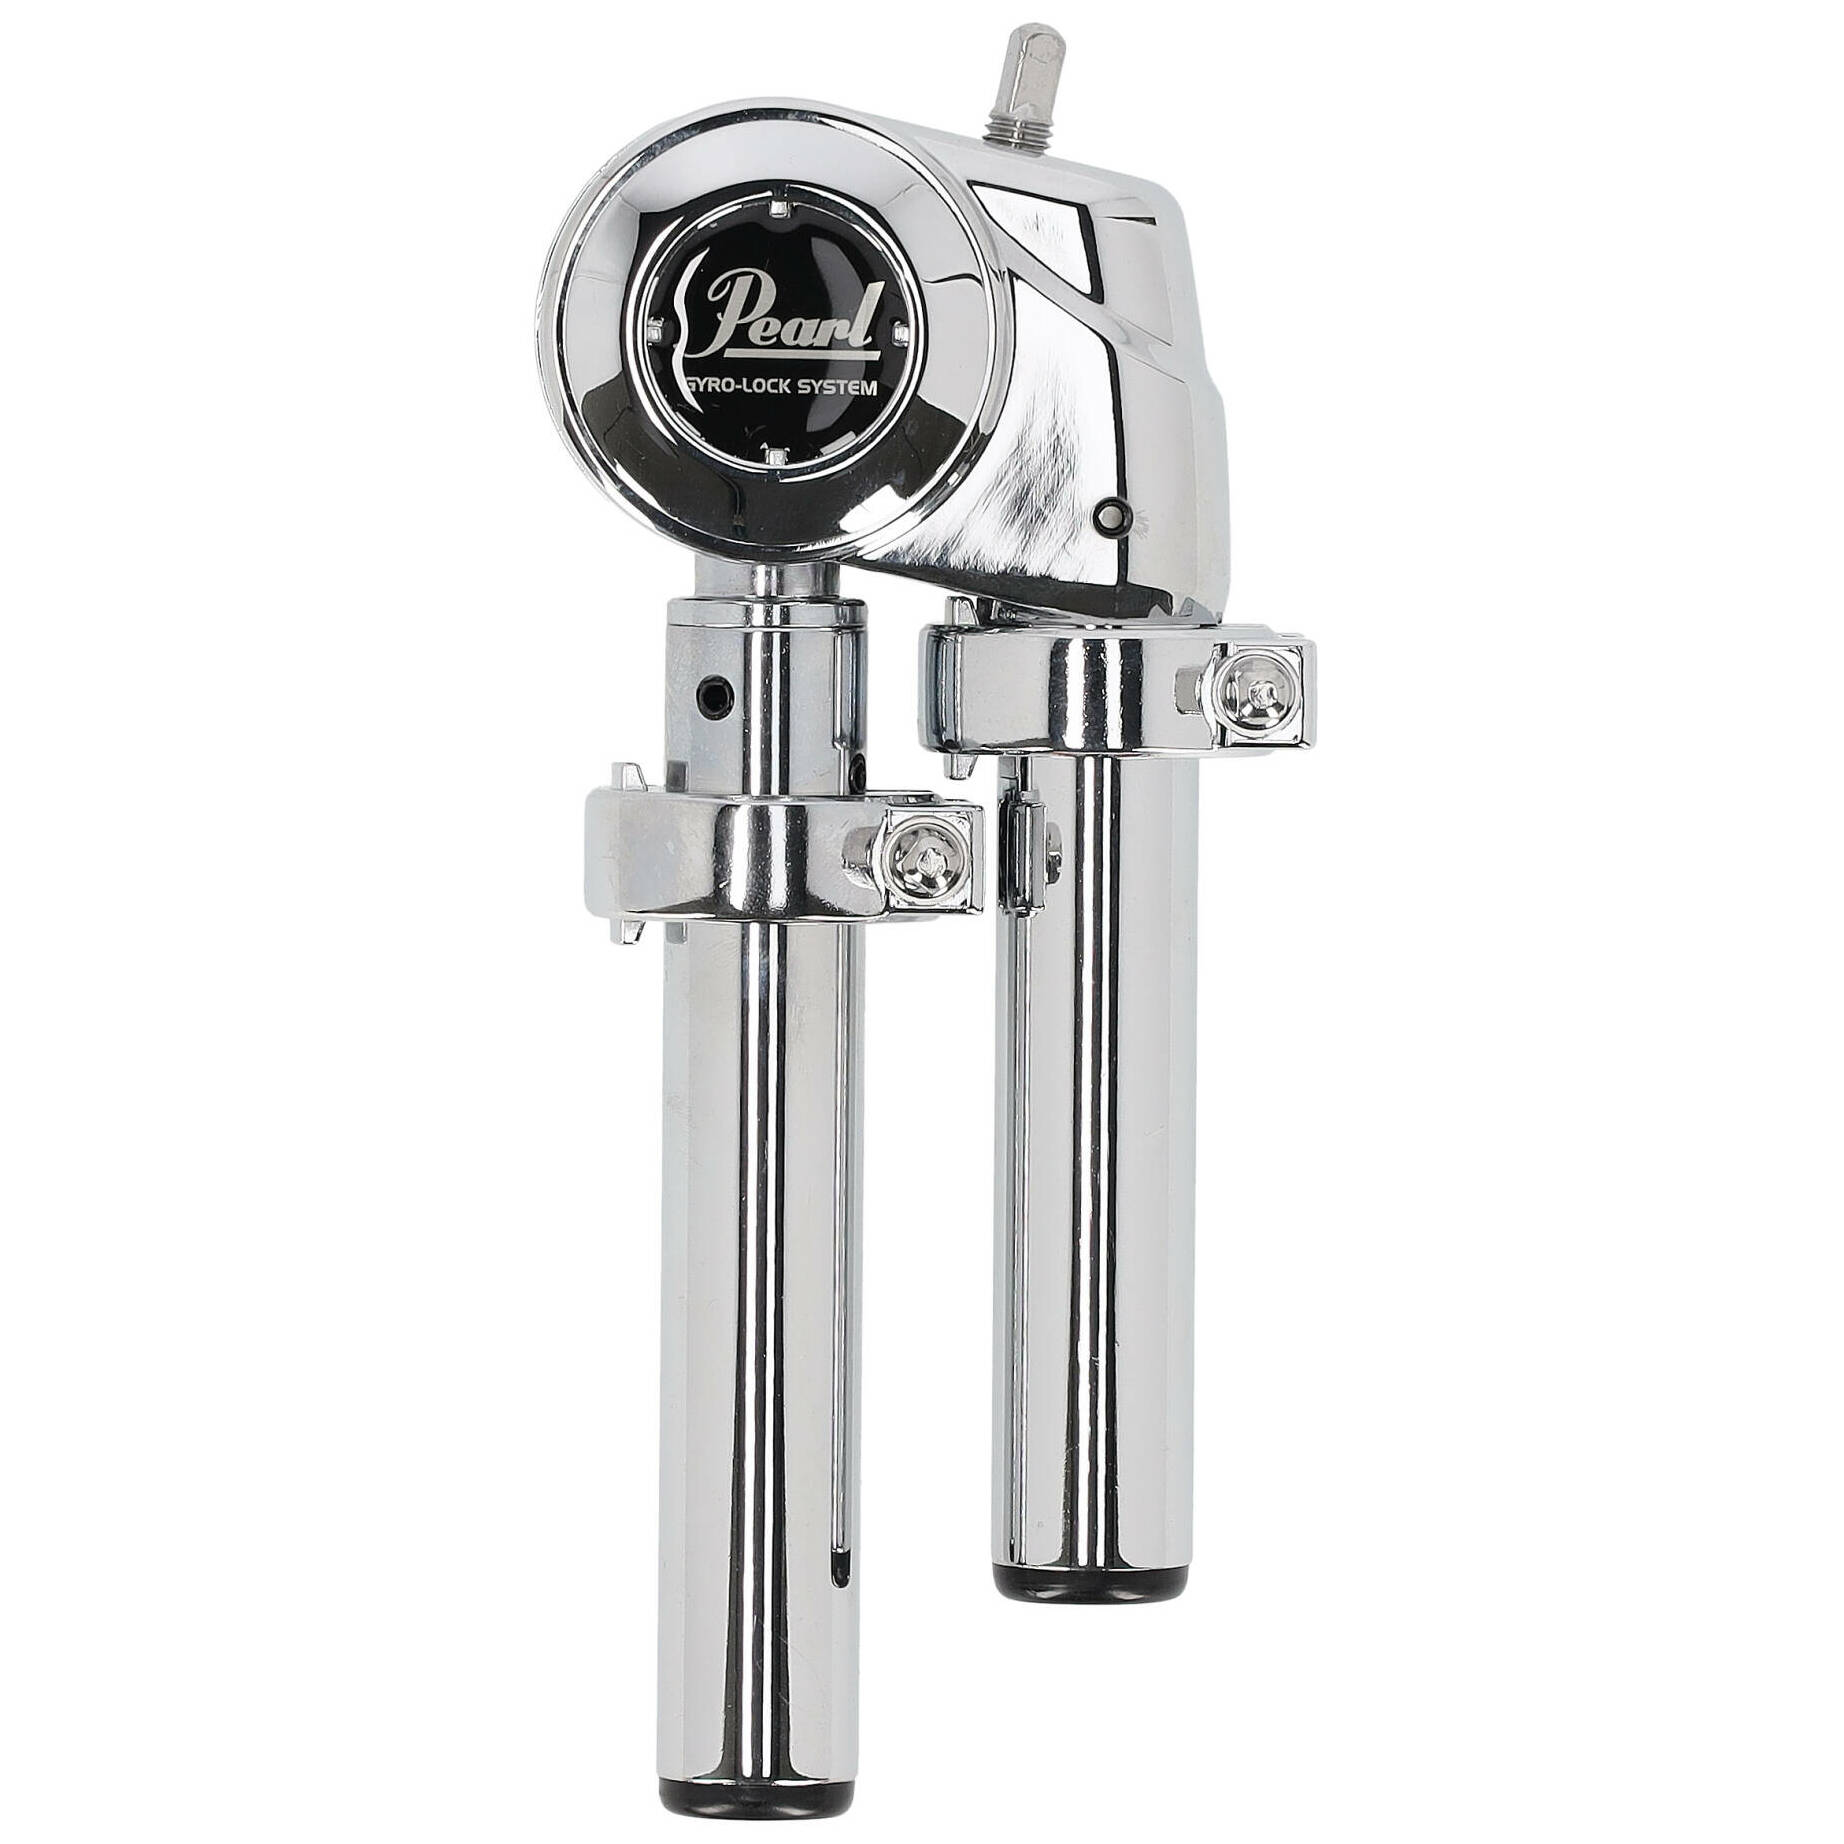 Pearl TH-1030S Tomhalter